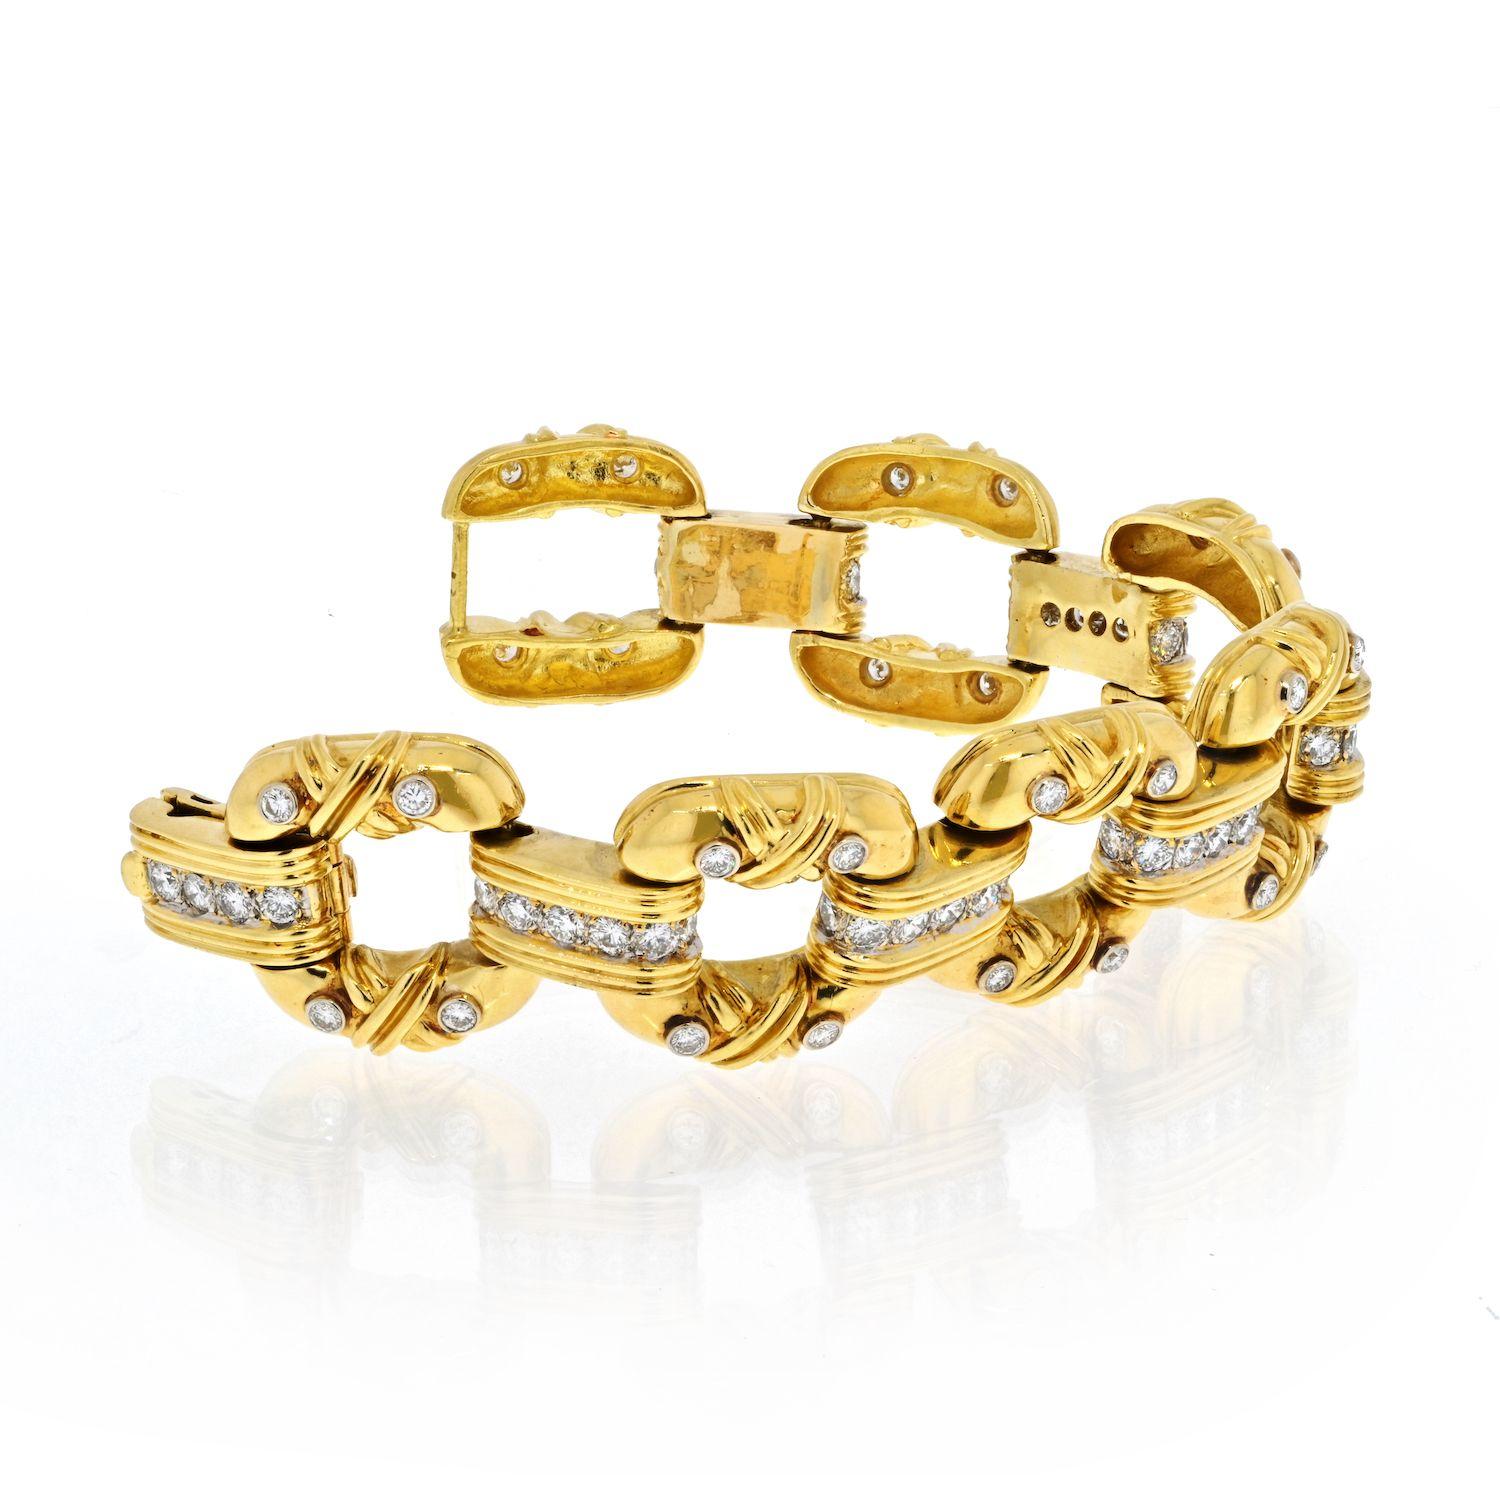 Large estate 18k yellow gold link bracelet that features soft cushion like open links with bezel and prong set diamonds. 
8 inches long. 
1 inch wide. 
Grams 113gr.